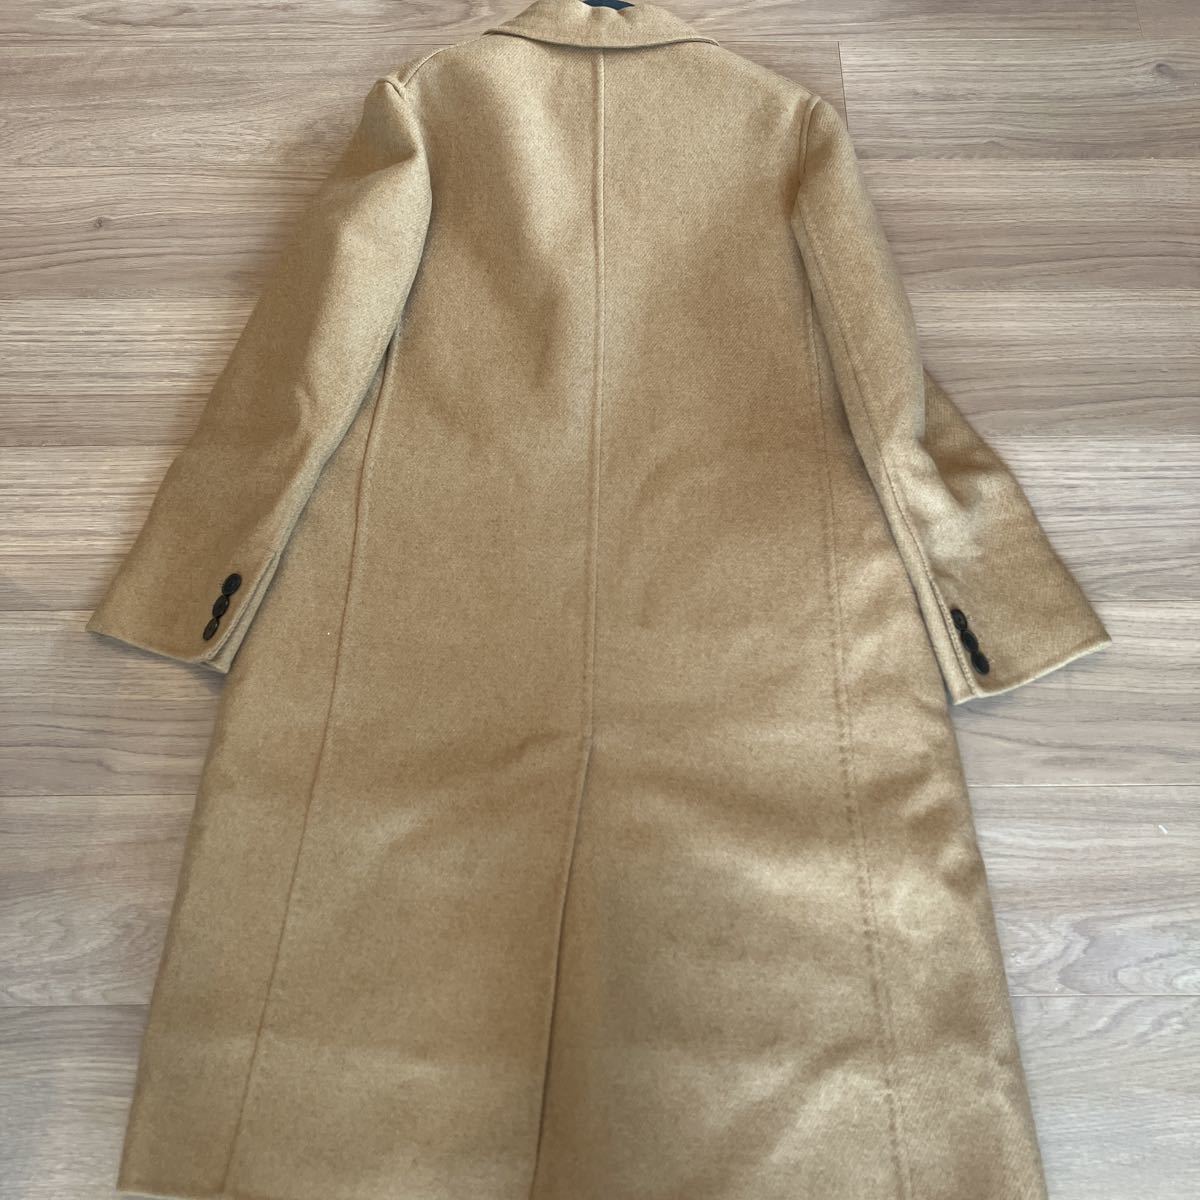  Christian Dior Christian Dior Camel 100% one sheets tailoring Chesterfield coat several times have on as good as new regular price 680,000 size 34 7-9 number 